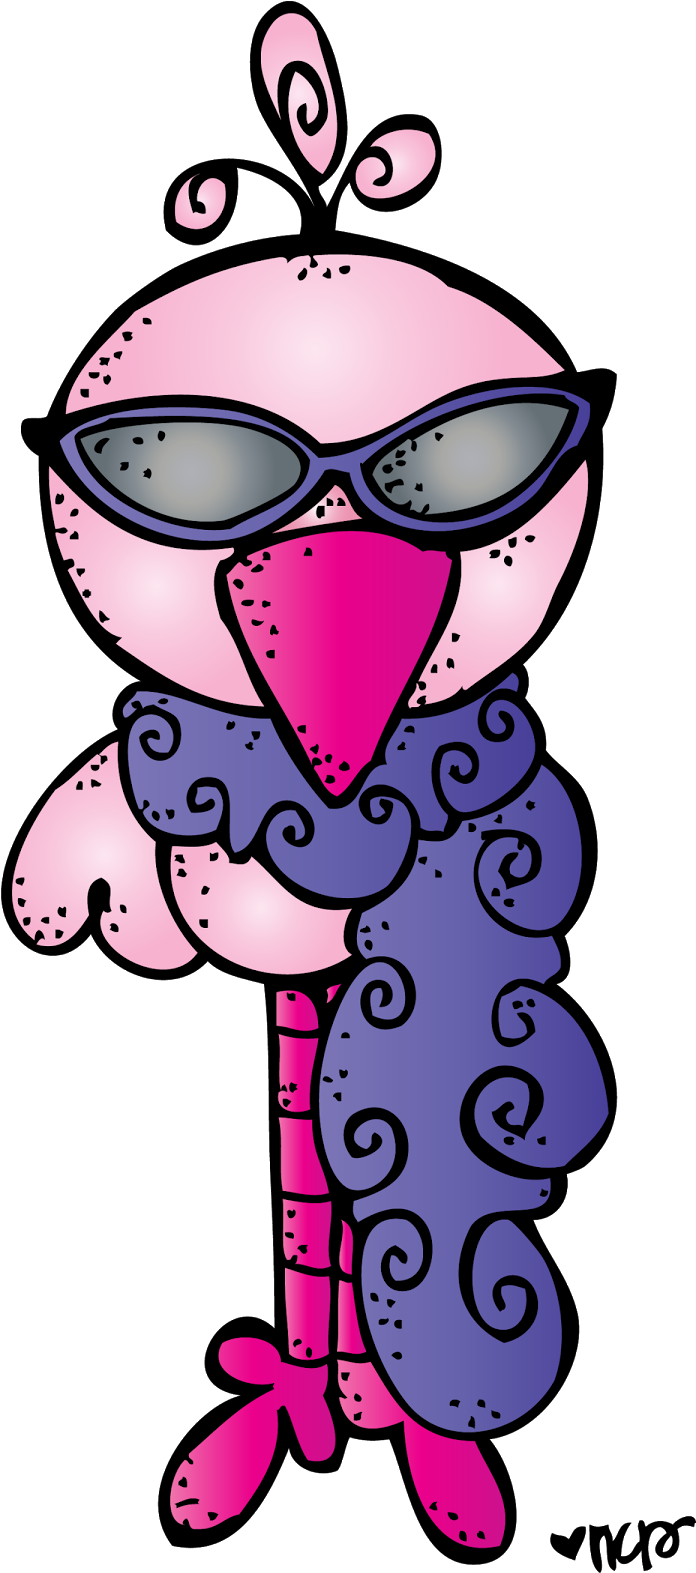 Check Out This Super Adorable And Cool Flamingo That - Check Out This Super Adorable And Cool Flamingo That (1328x2999)